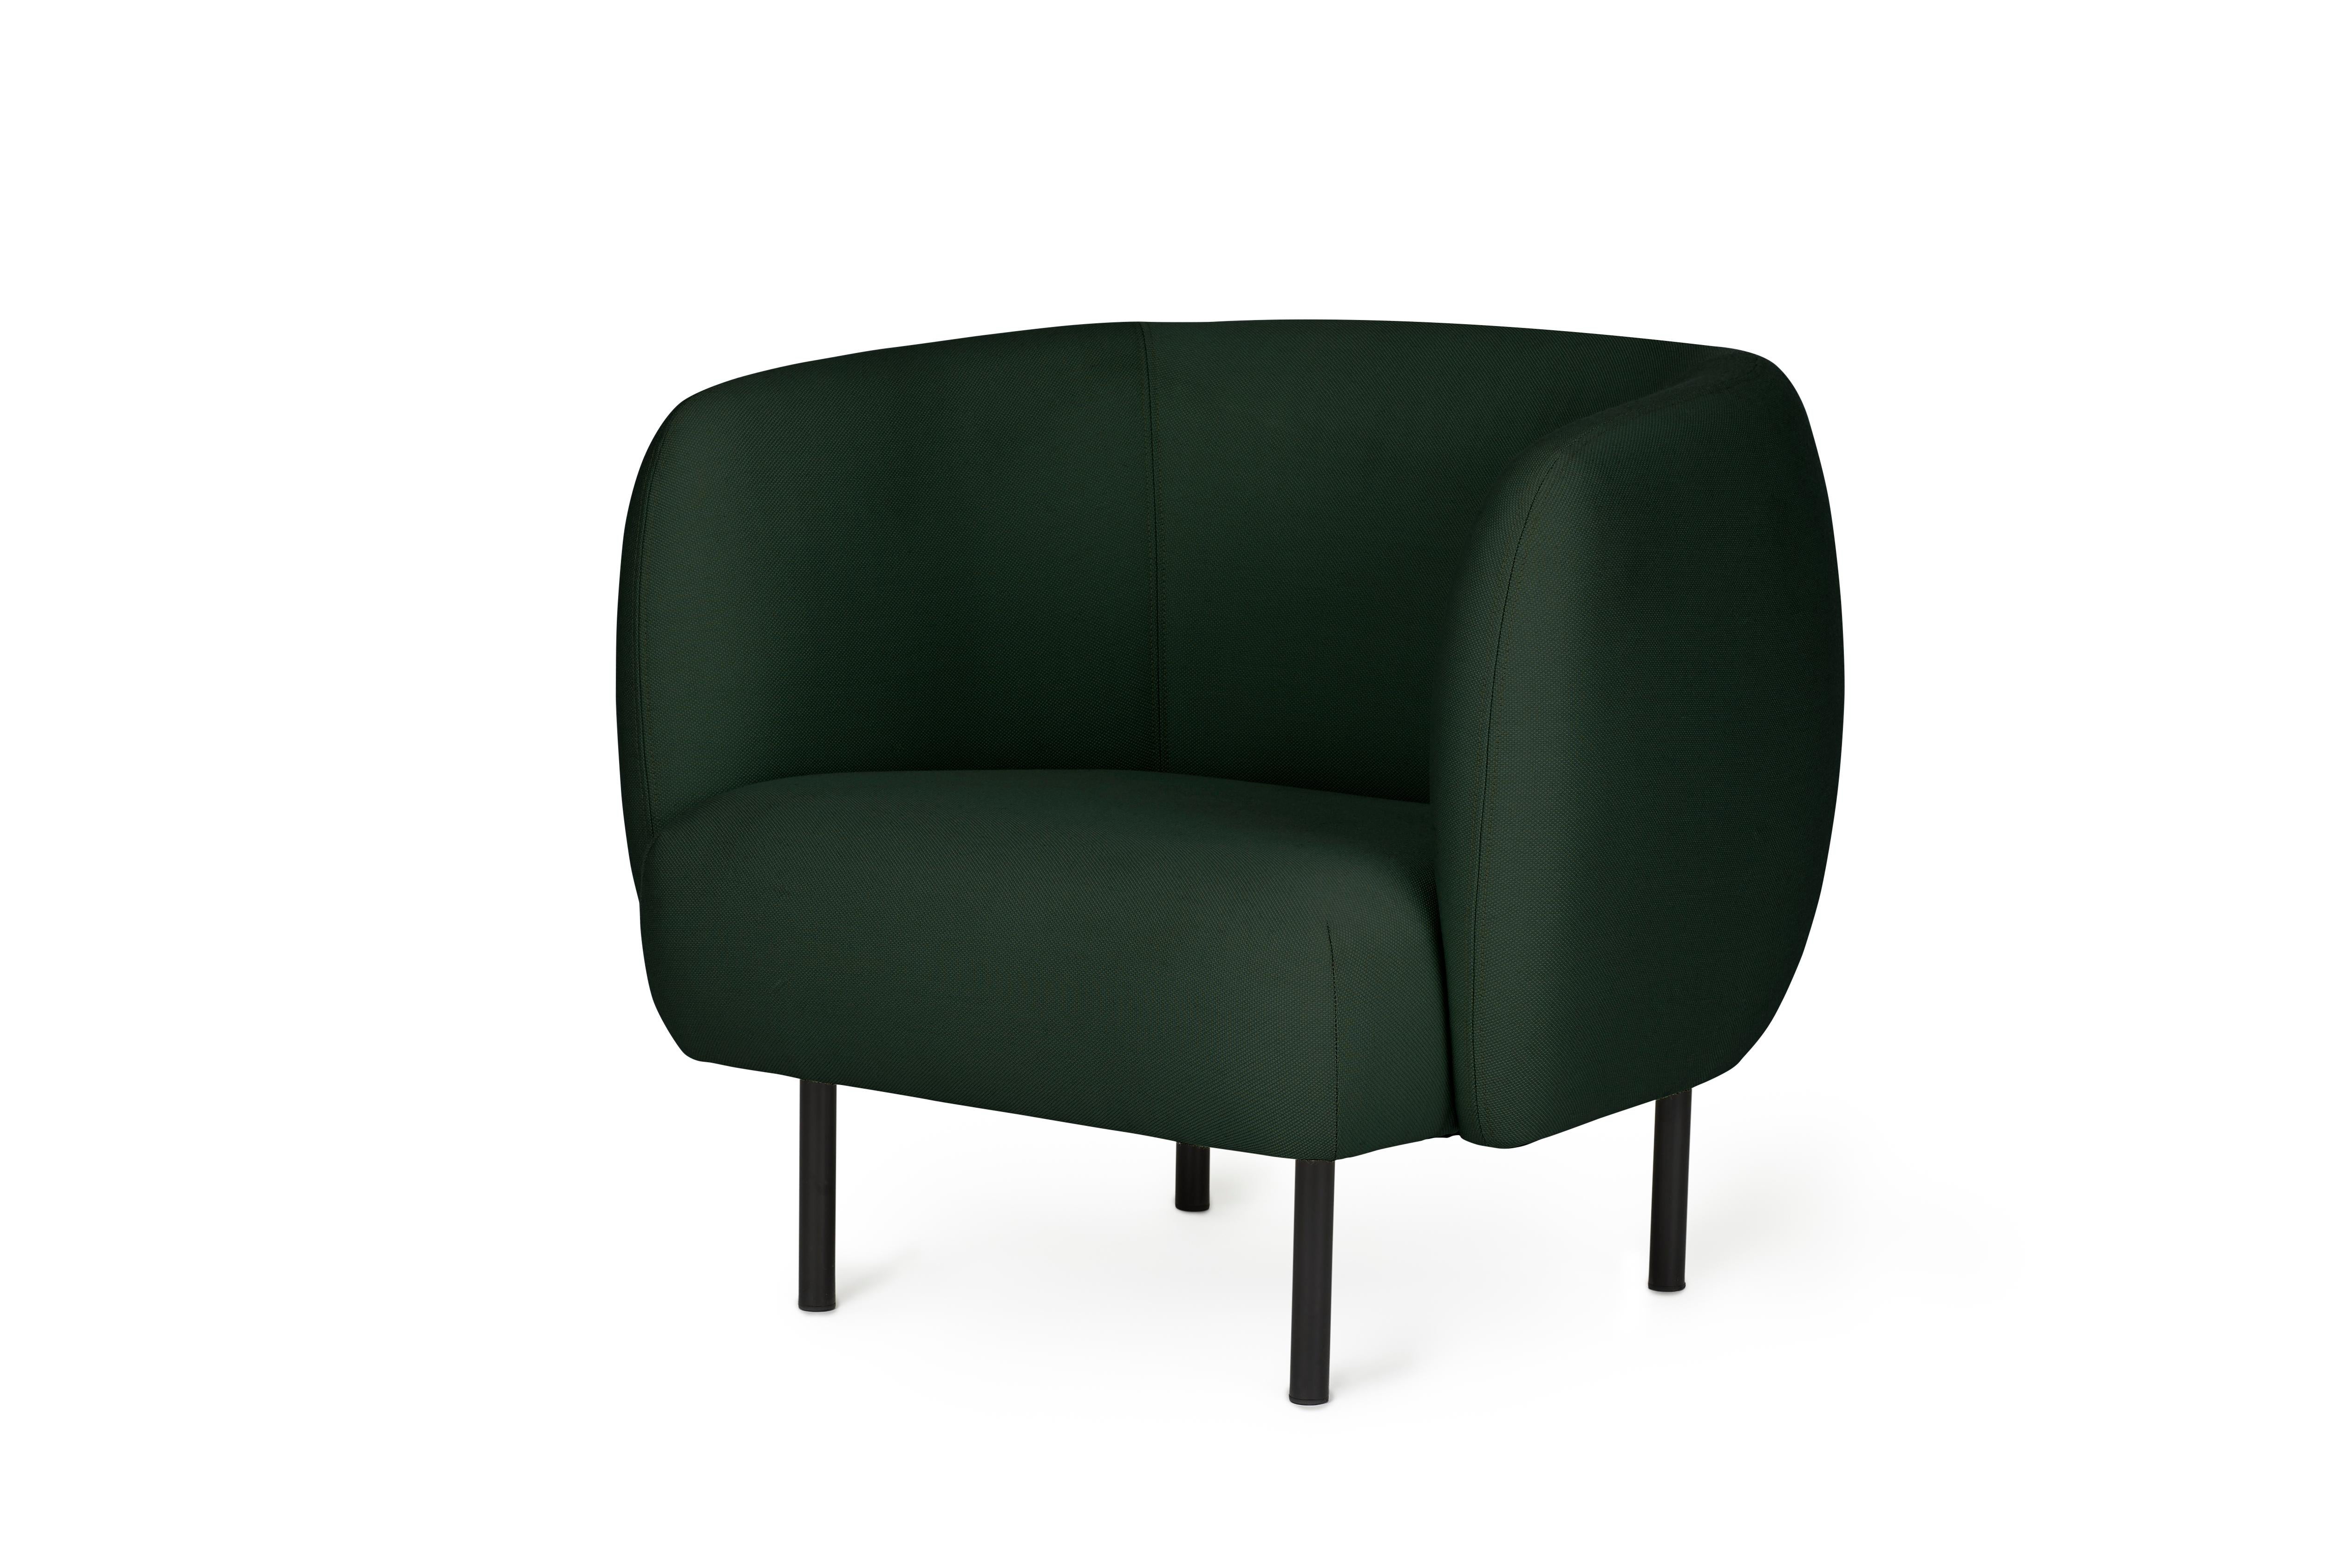 For Sale: Green (Steelcut 975) Cape Lounge Chair, by Charlotte Høncke from Warm Nordic 2